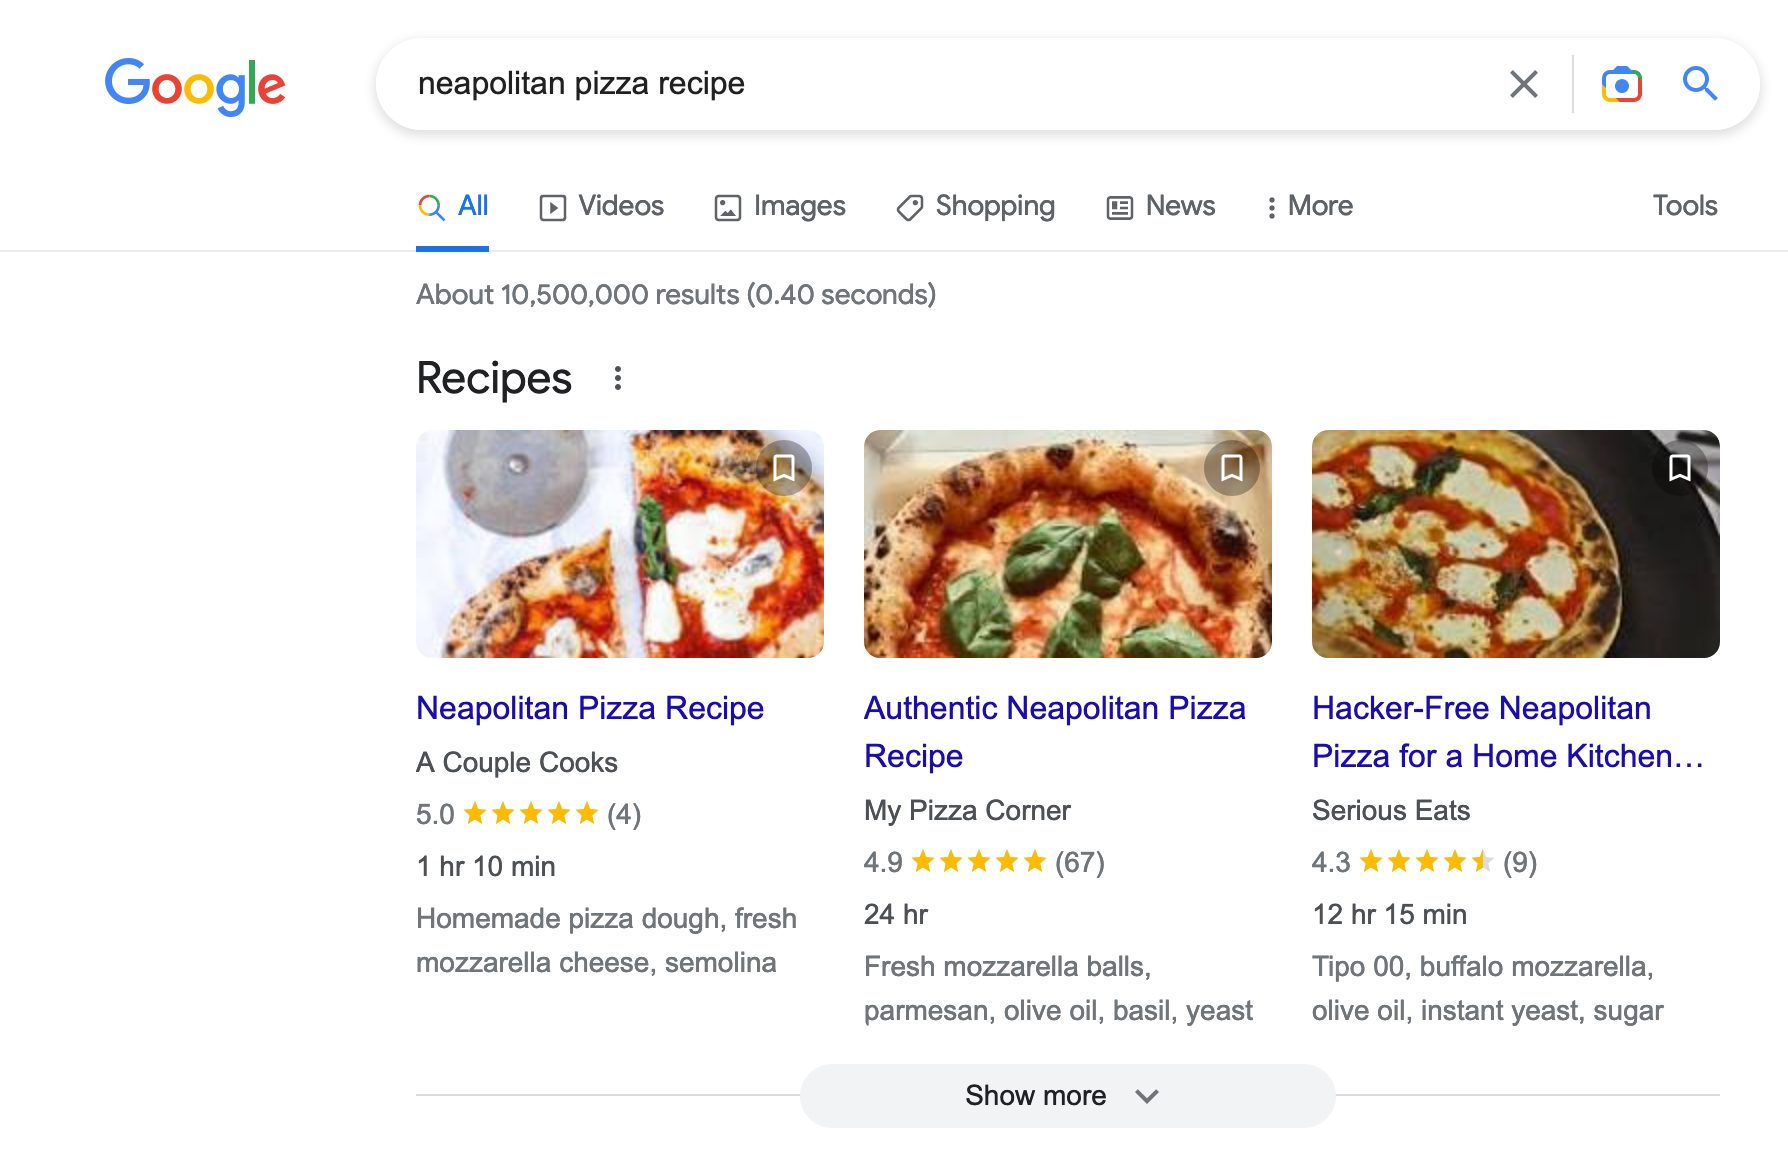 Example of rich snippets on Google.